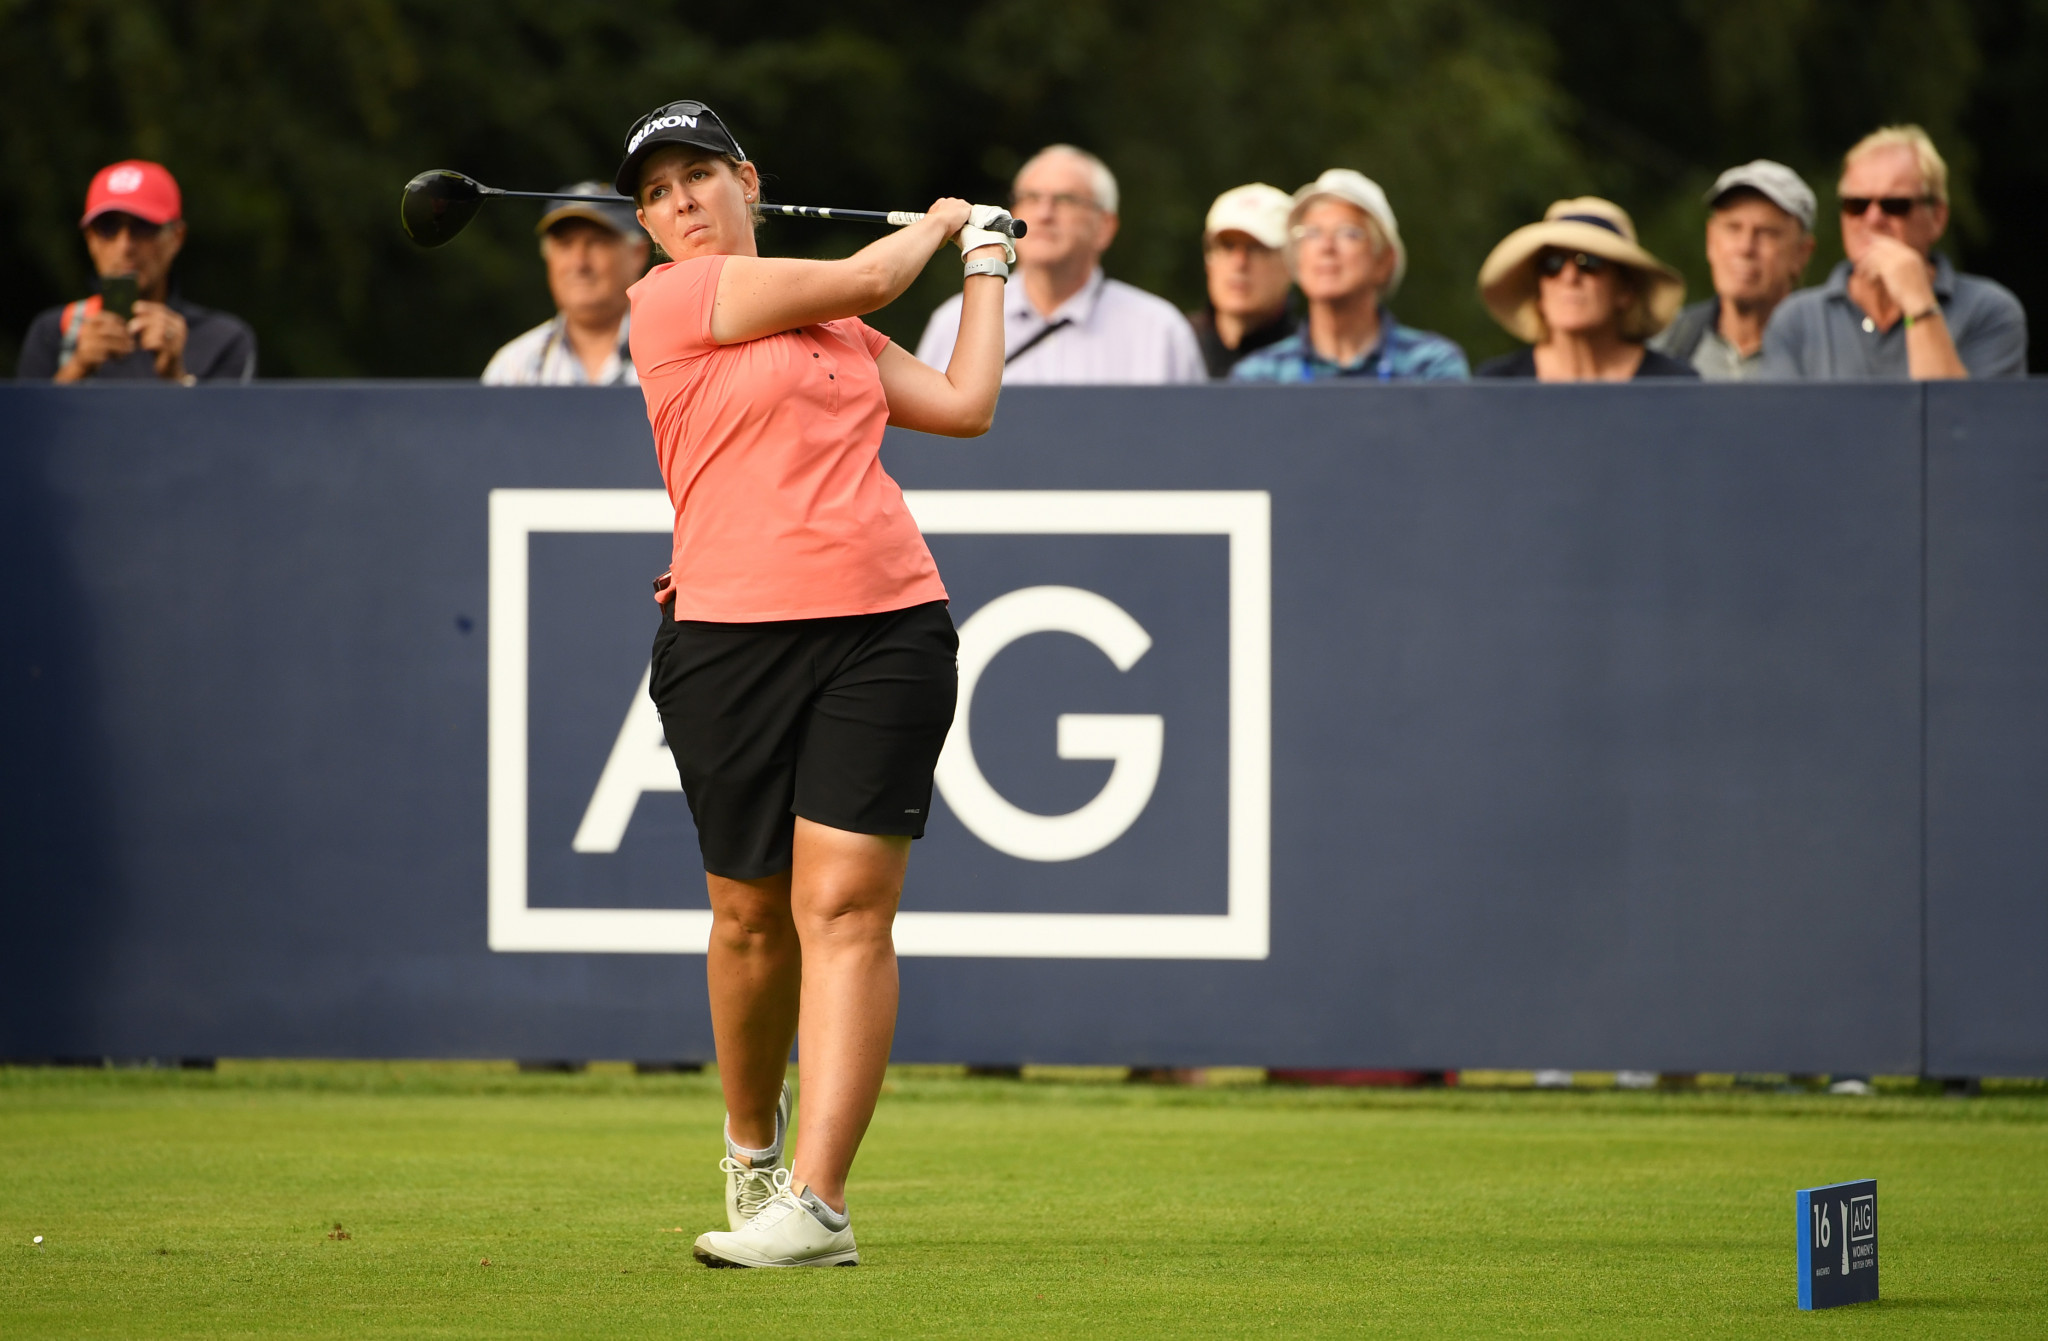 South Africa's Ashleigh Buhai extended her lead at the Women's British Open to three shots after firing a five-under-par 67 in the second round in Woburn ©Getty Images